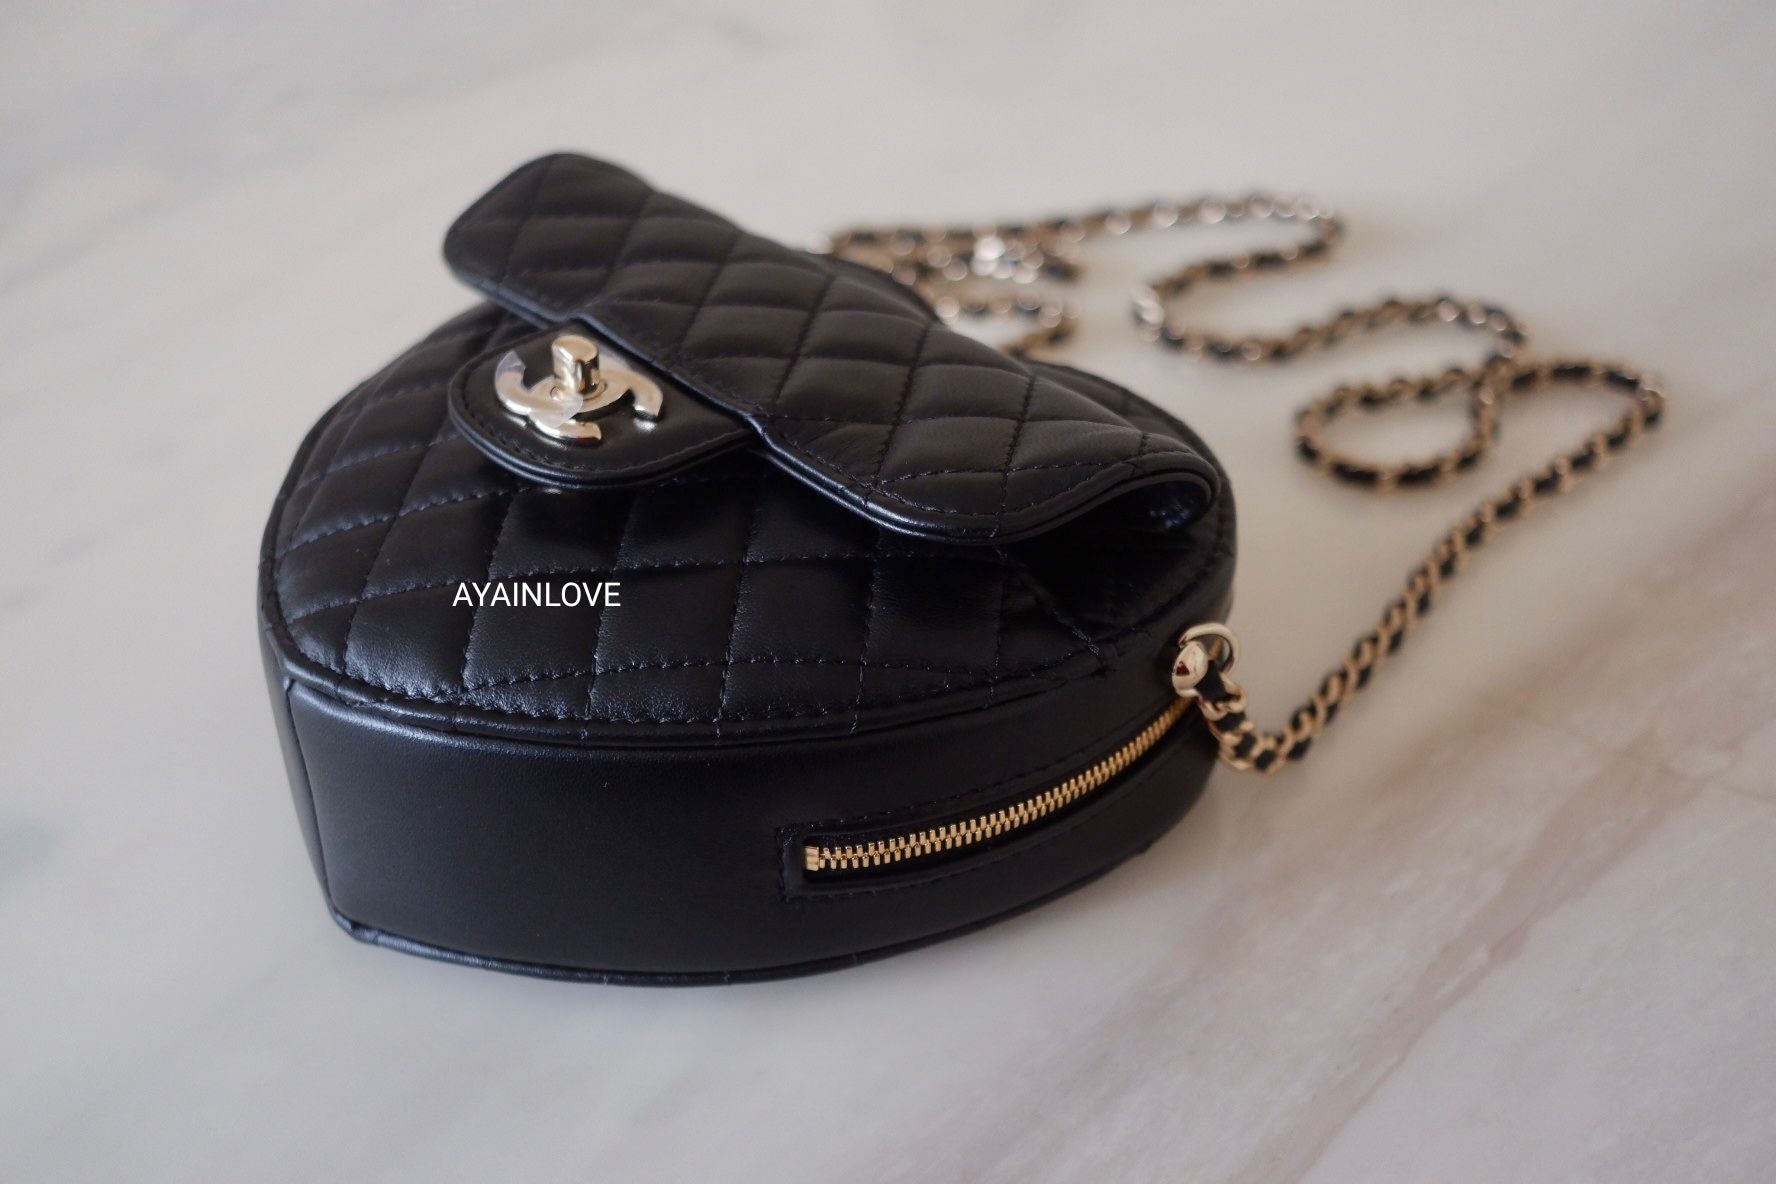 Chanel Heart Bag 22S Pink Small